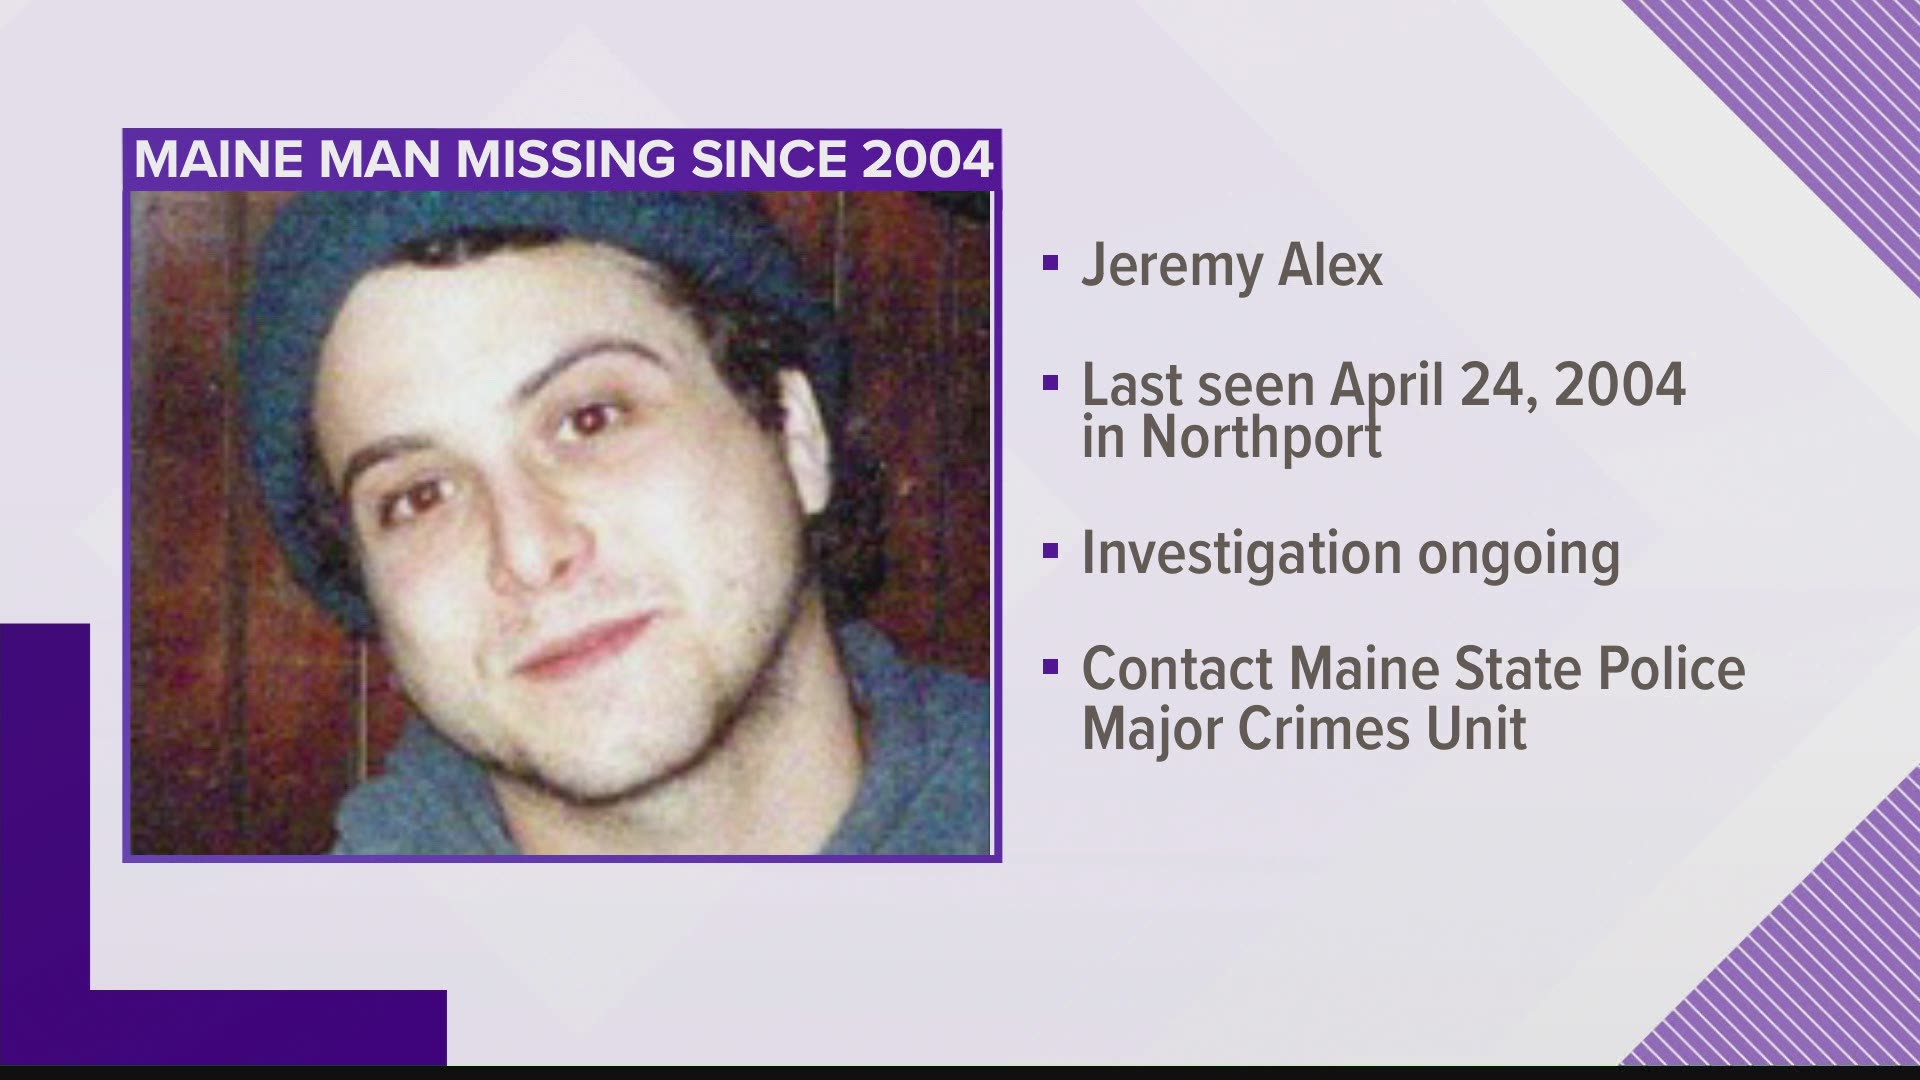 Jeremy Alex disappeared on this day in 2004.